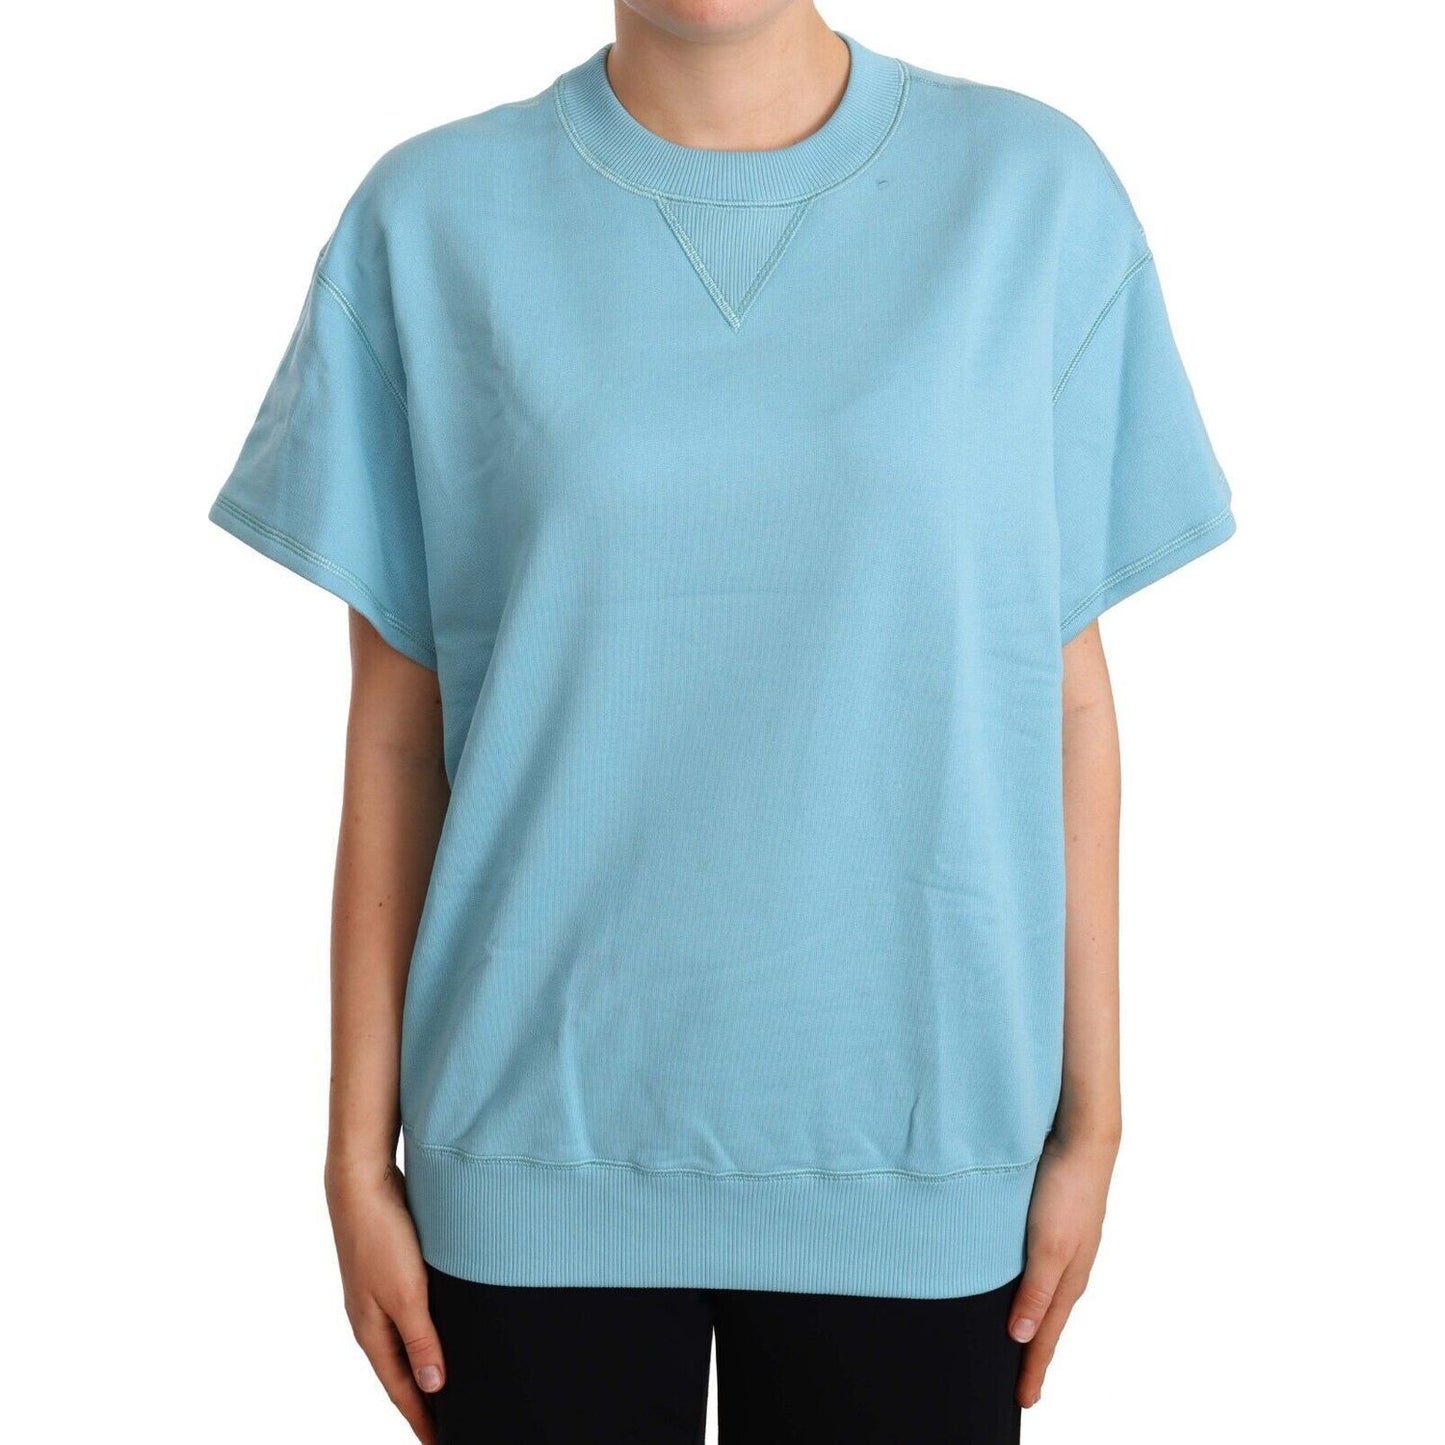 Dolce & Gabbana Blue Cotton Short Sleeves Crew Neck Top blue-cotton-short-sleeves-crew-neck-top WOMAN TOPS AND SHIRTS s-l1600-2022-09-16T114011.904-2bd0783a-0aa.jpg